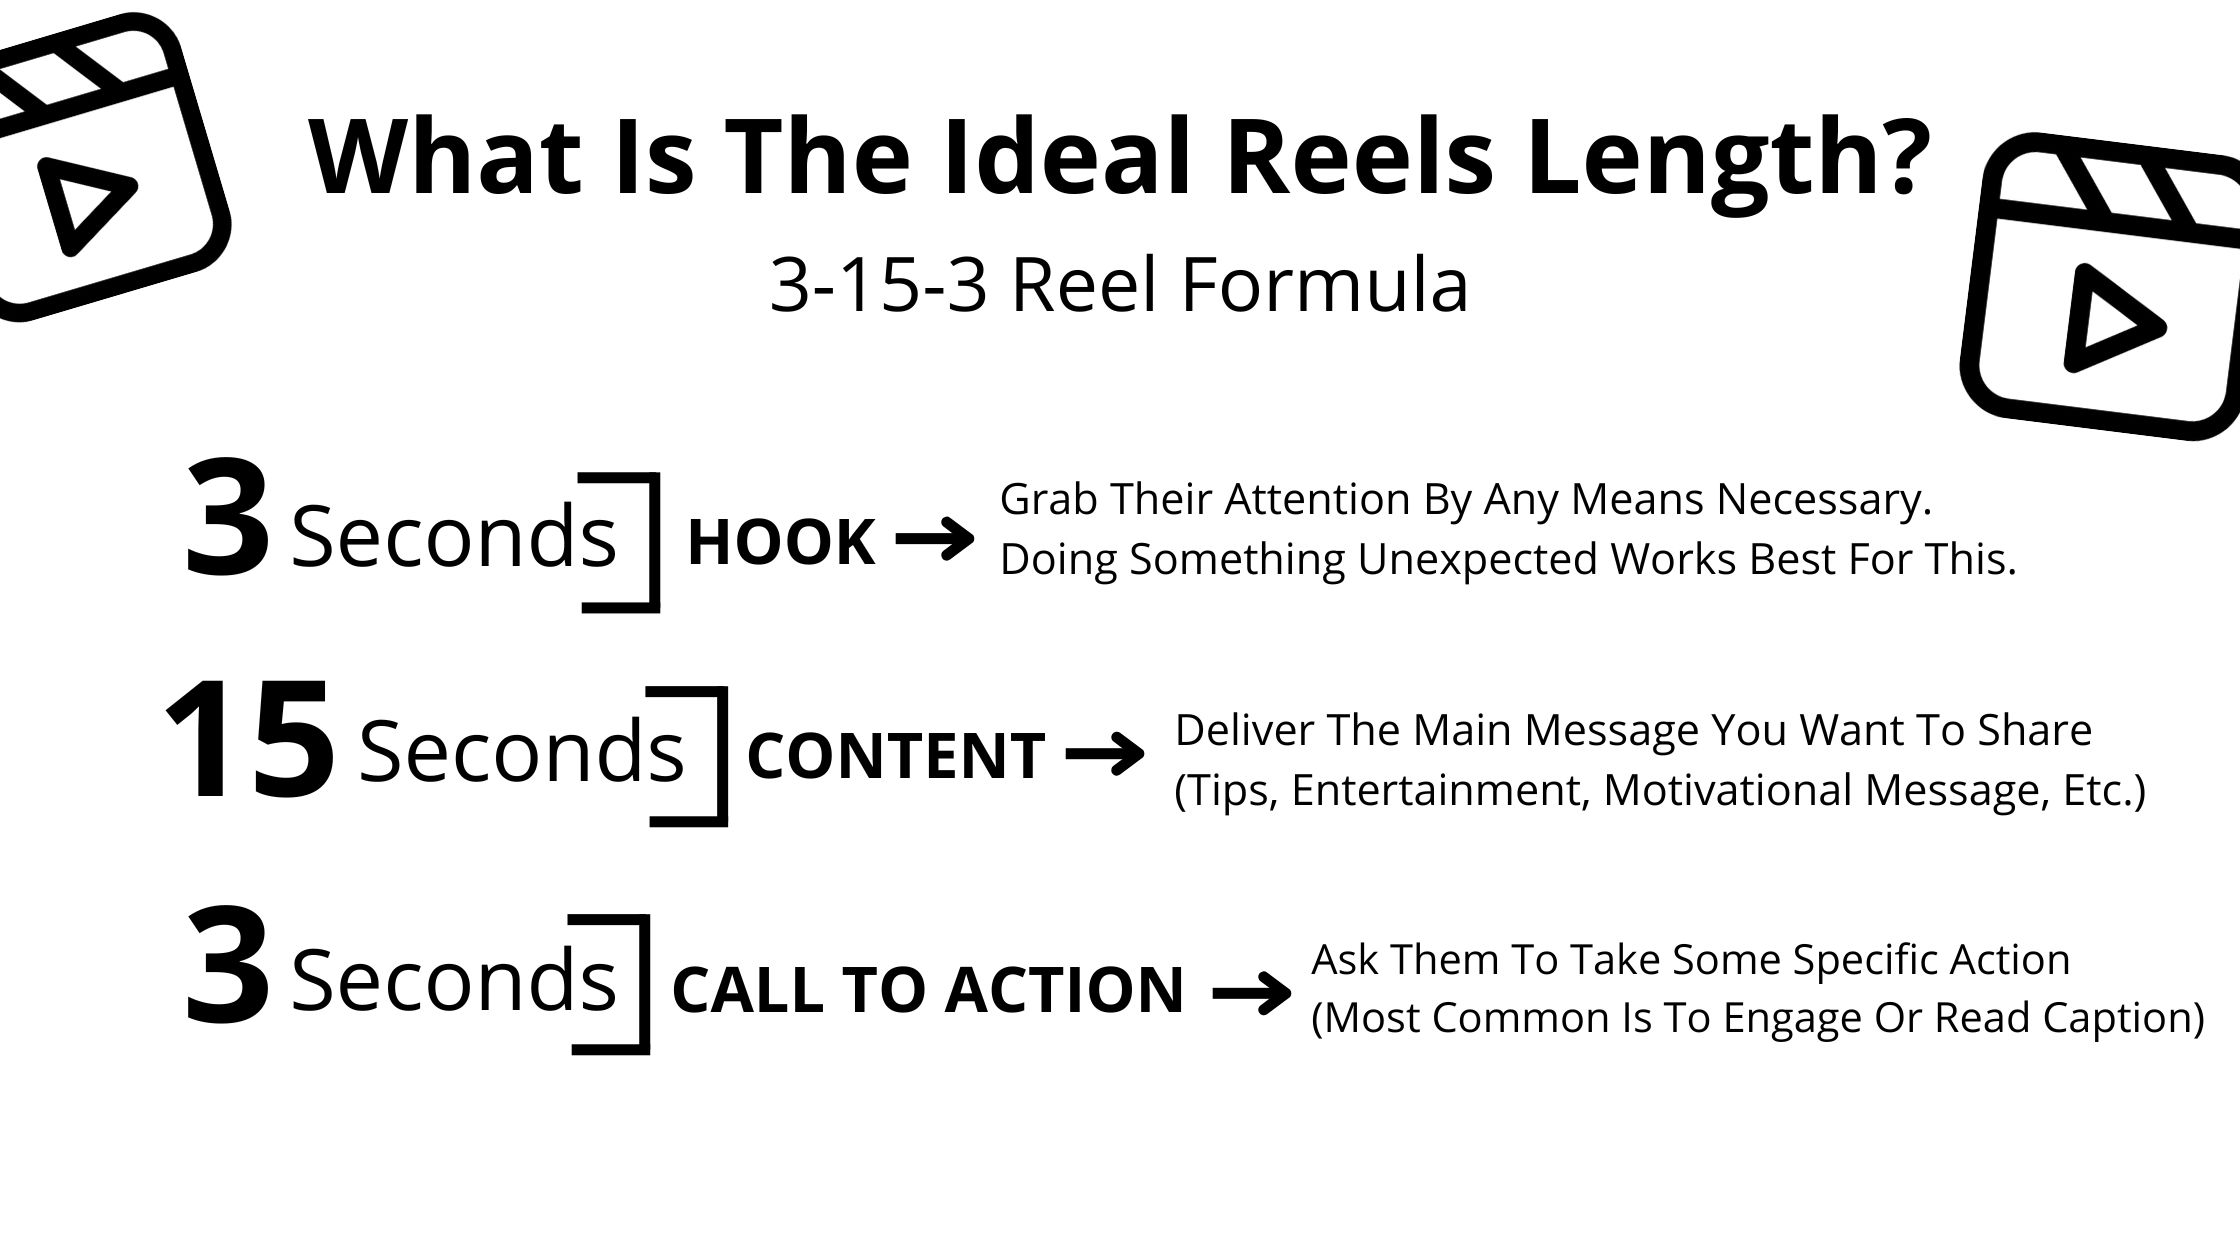 What Is The Ideal Instagram Reels Length For The Most Views? – Filip Konecny